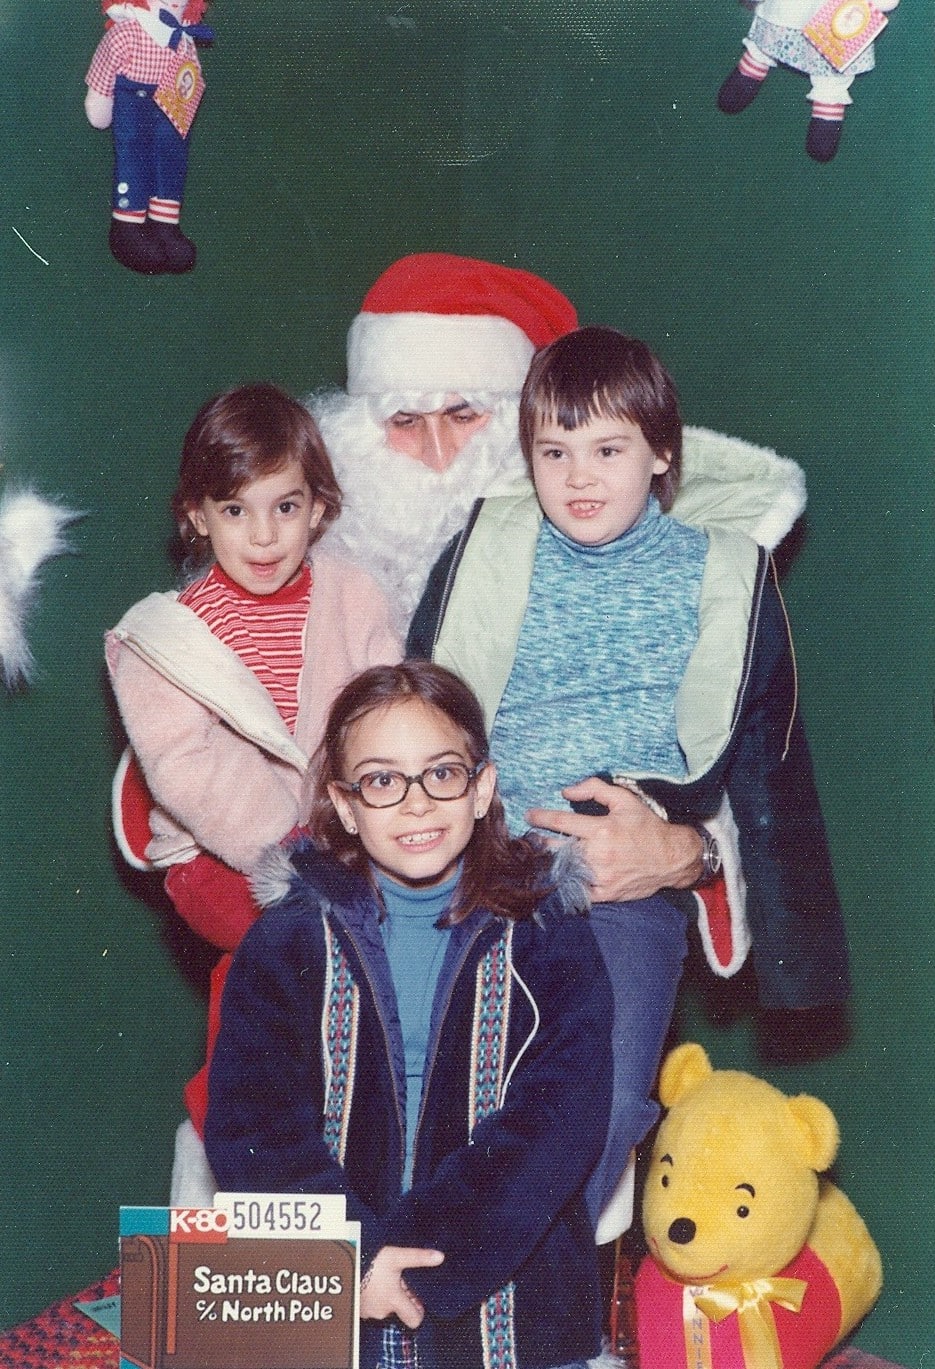 Cathy's daughter and two nieces with Santa. Photo enhanced and colors restored by MyHeritage